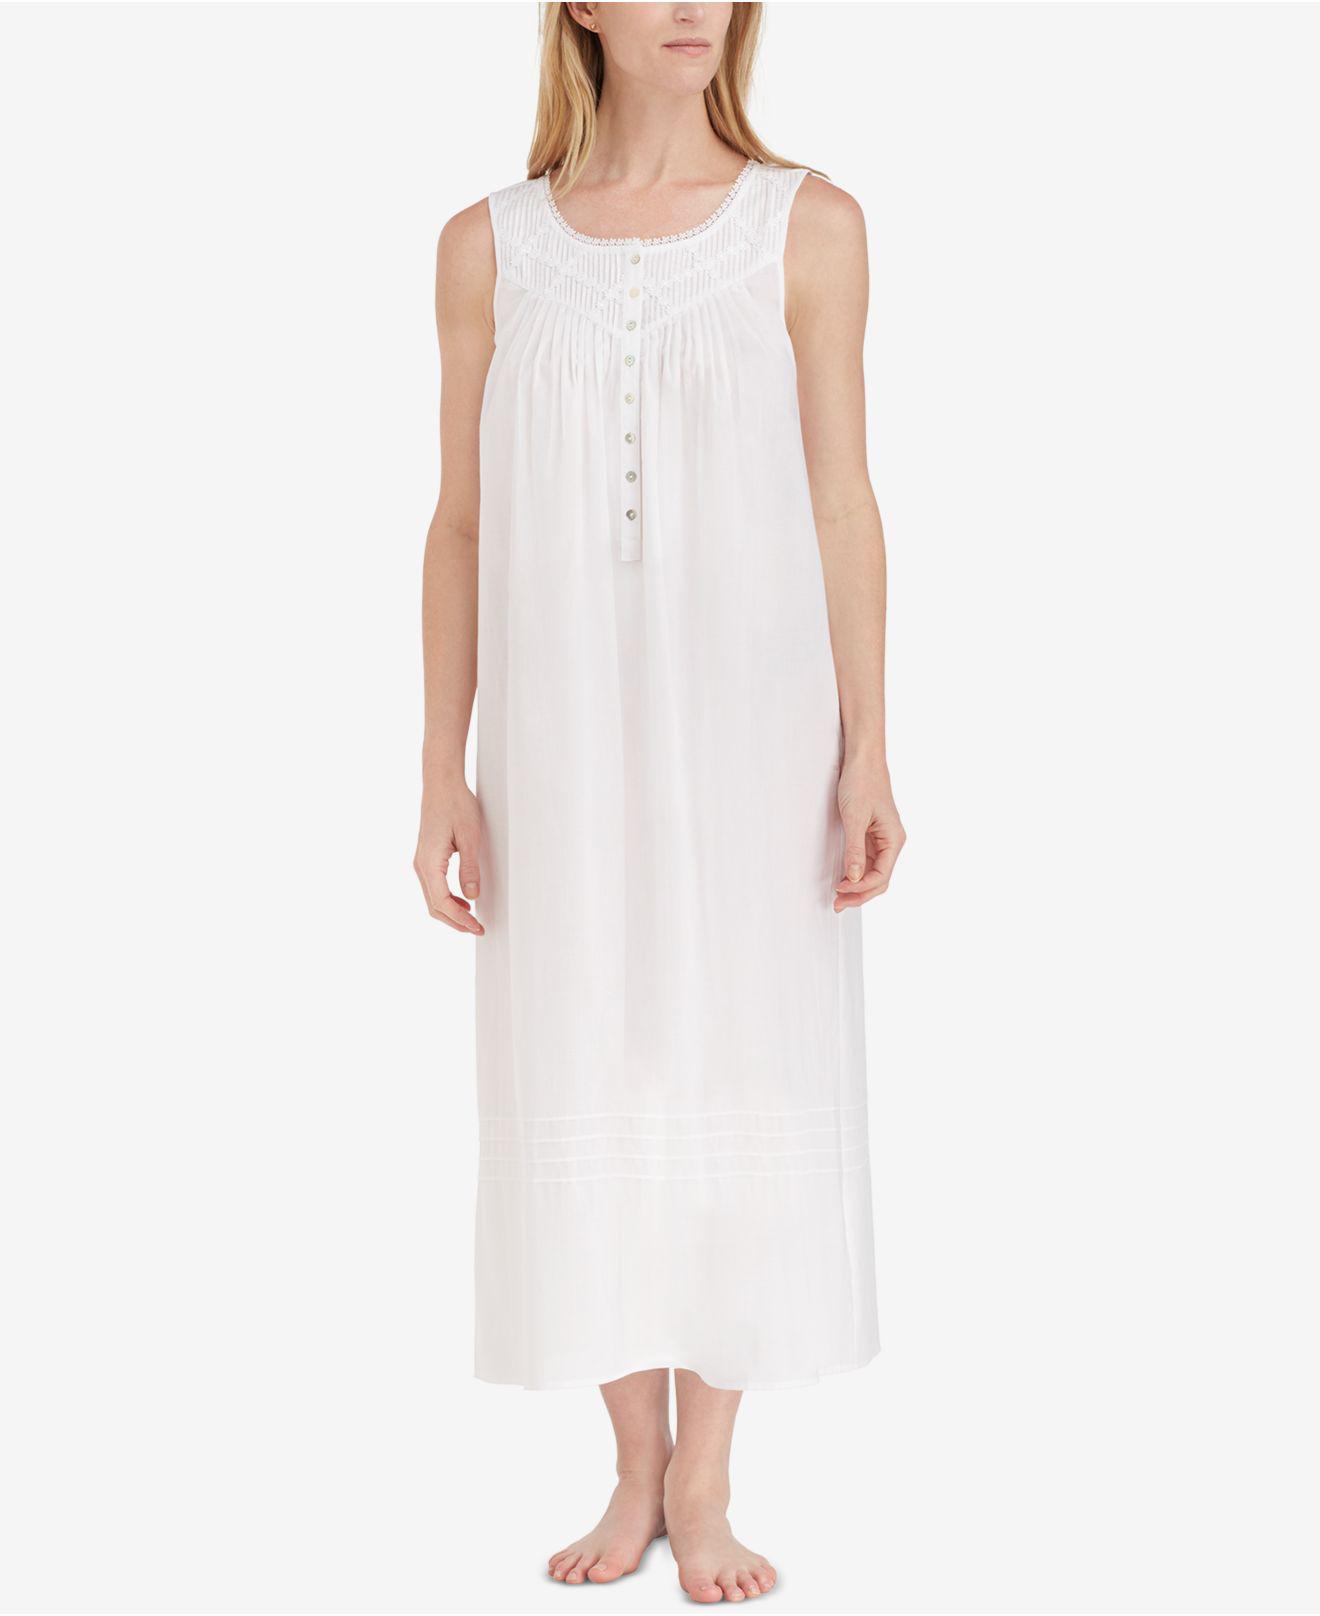 Eileen West Lace-trimmed Cotton Ballet-length Nightgown in White - Lyst